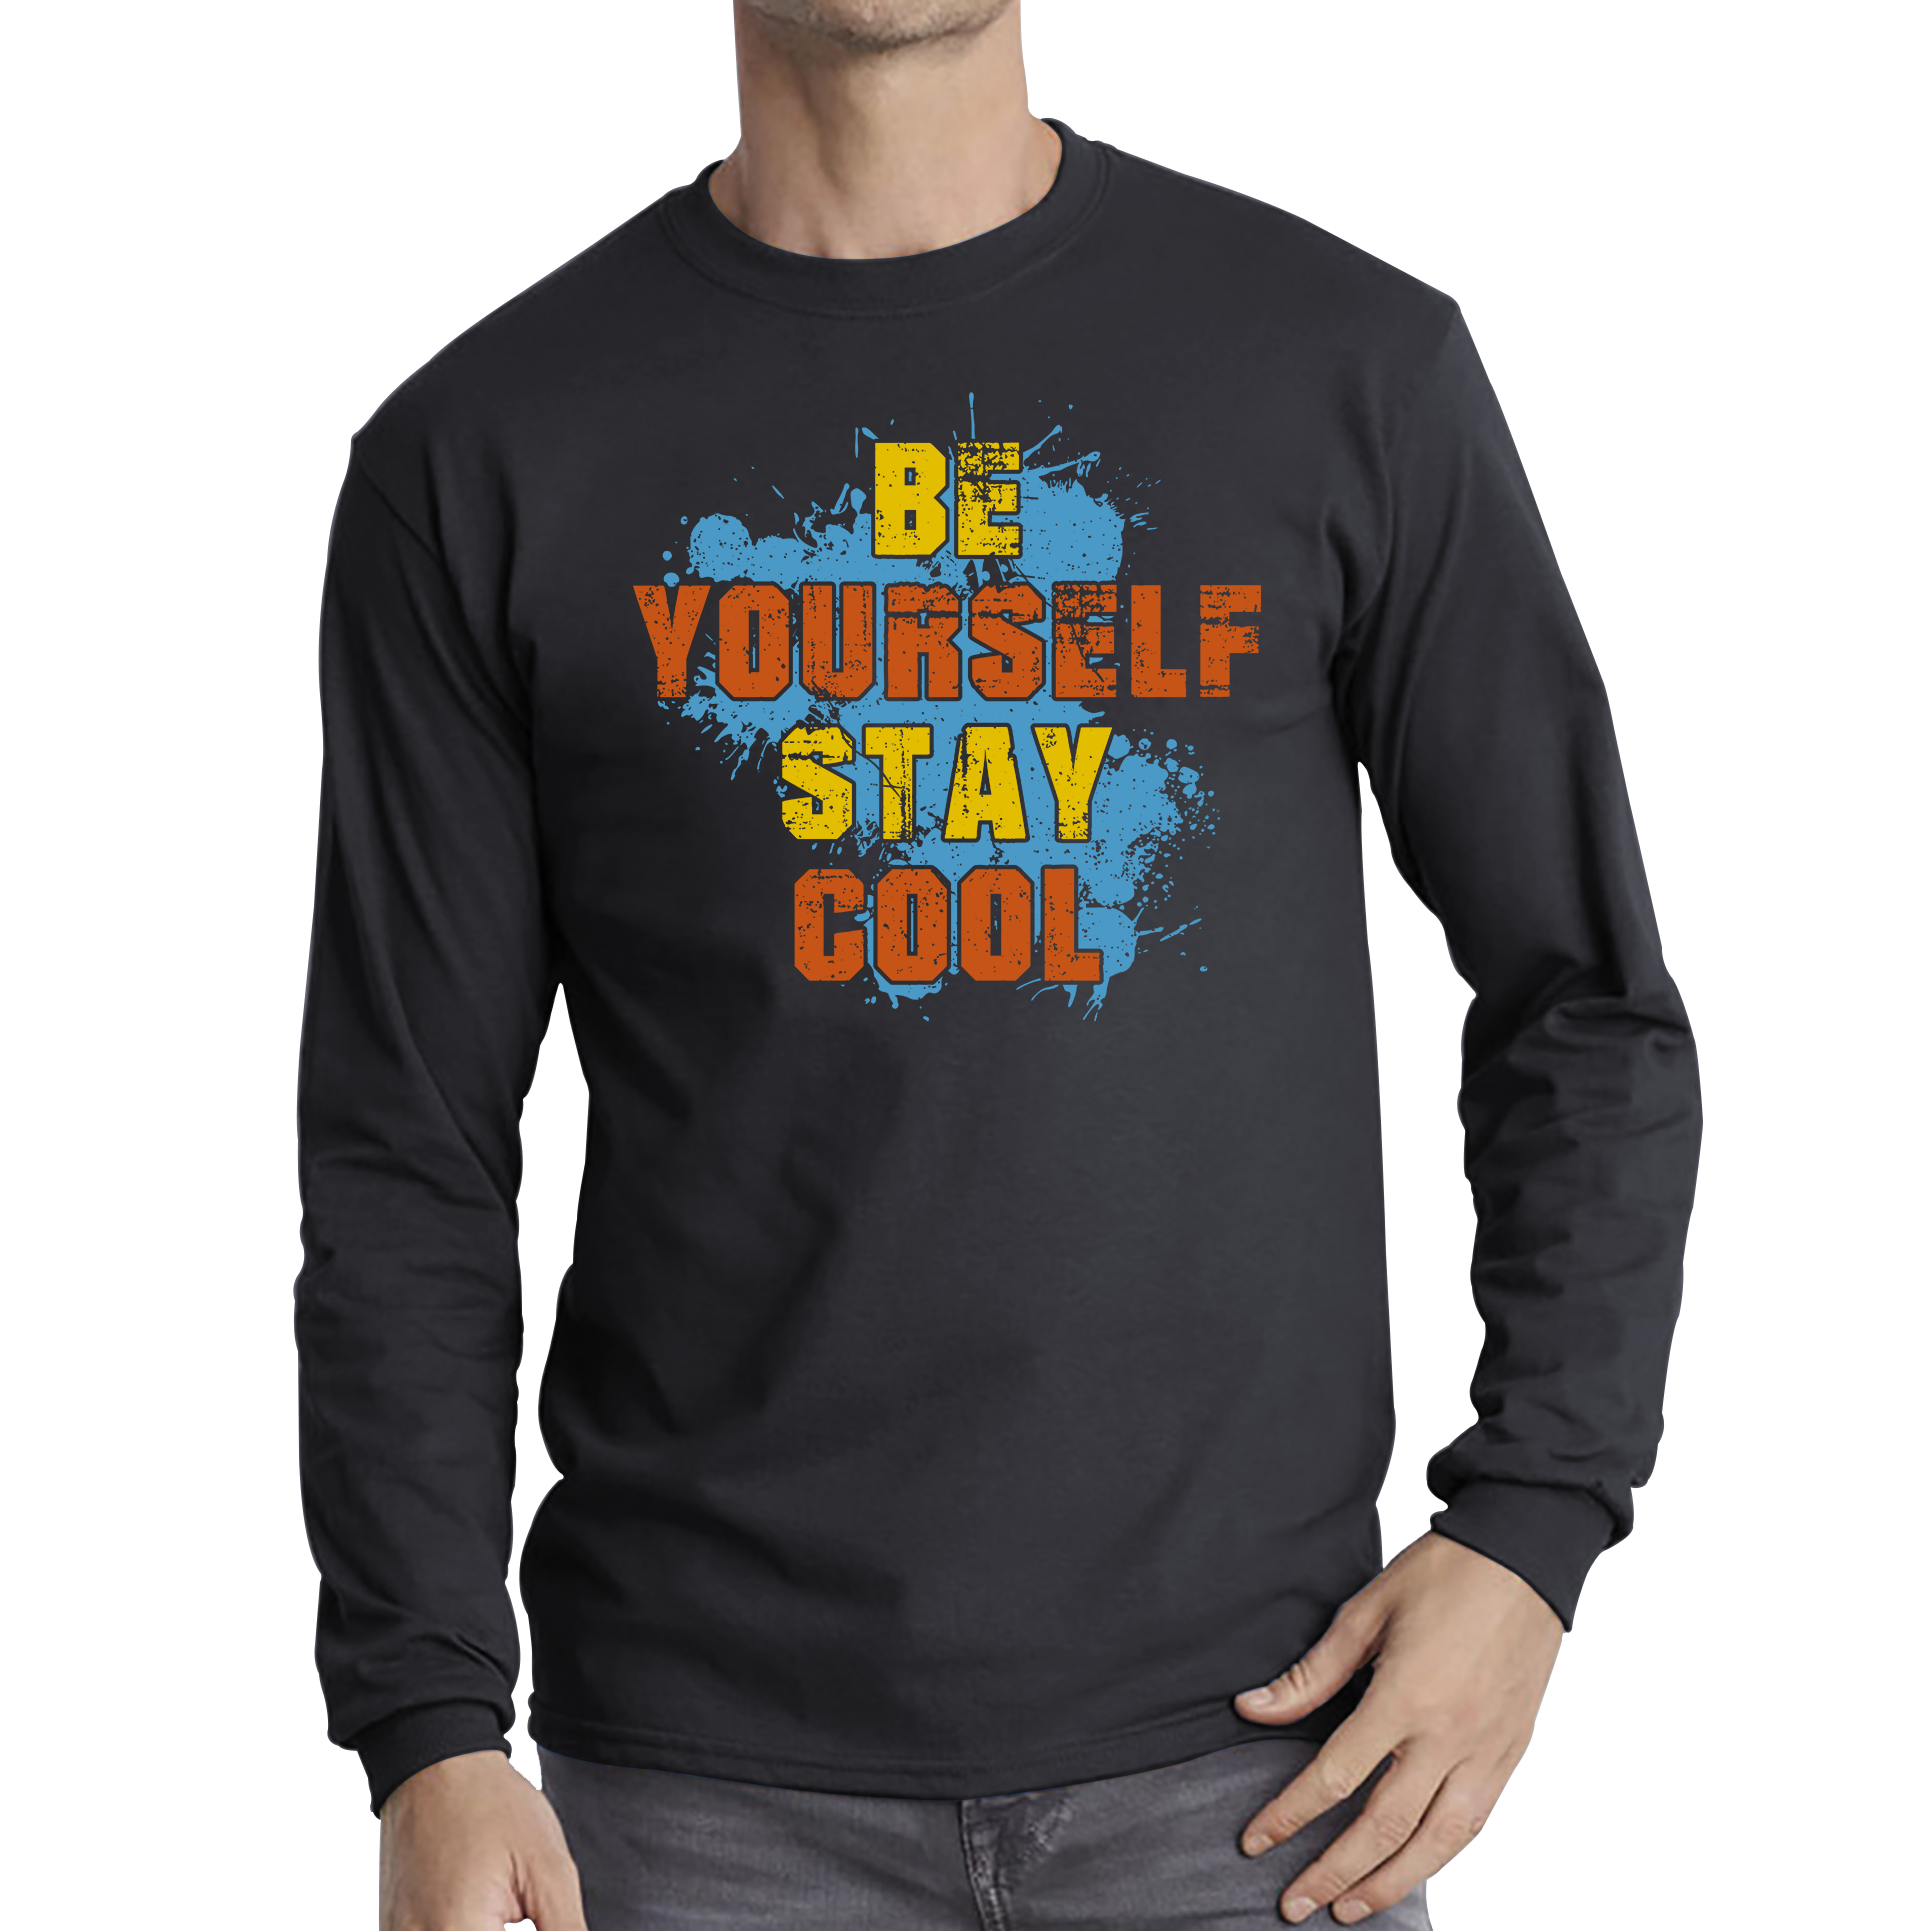 Be Yourself Stay Cool Shirt Inspirational Motivational Quote Long Sleeve T Shirt